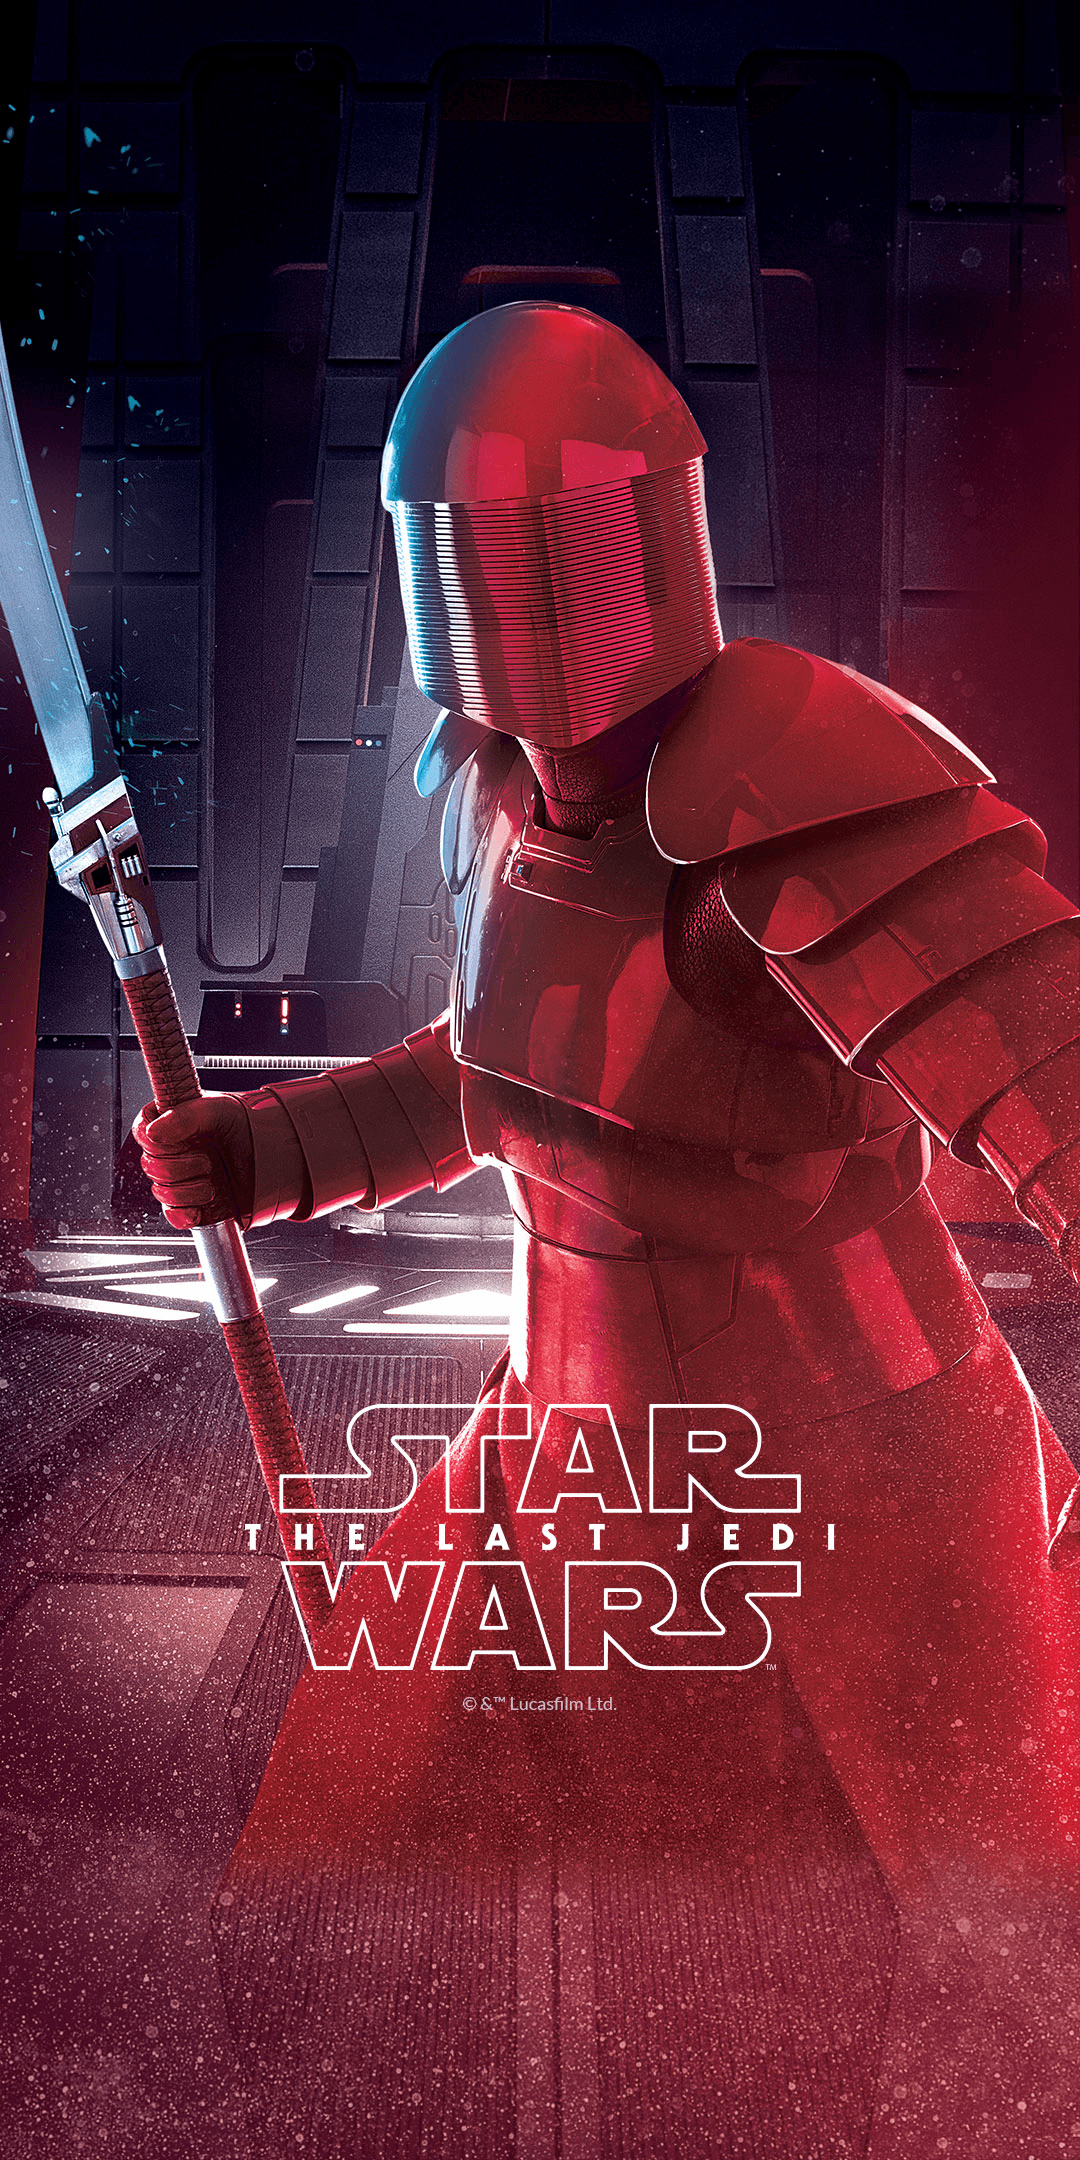 Get all the Star Wars: The Last Jedi wallpaper from